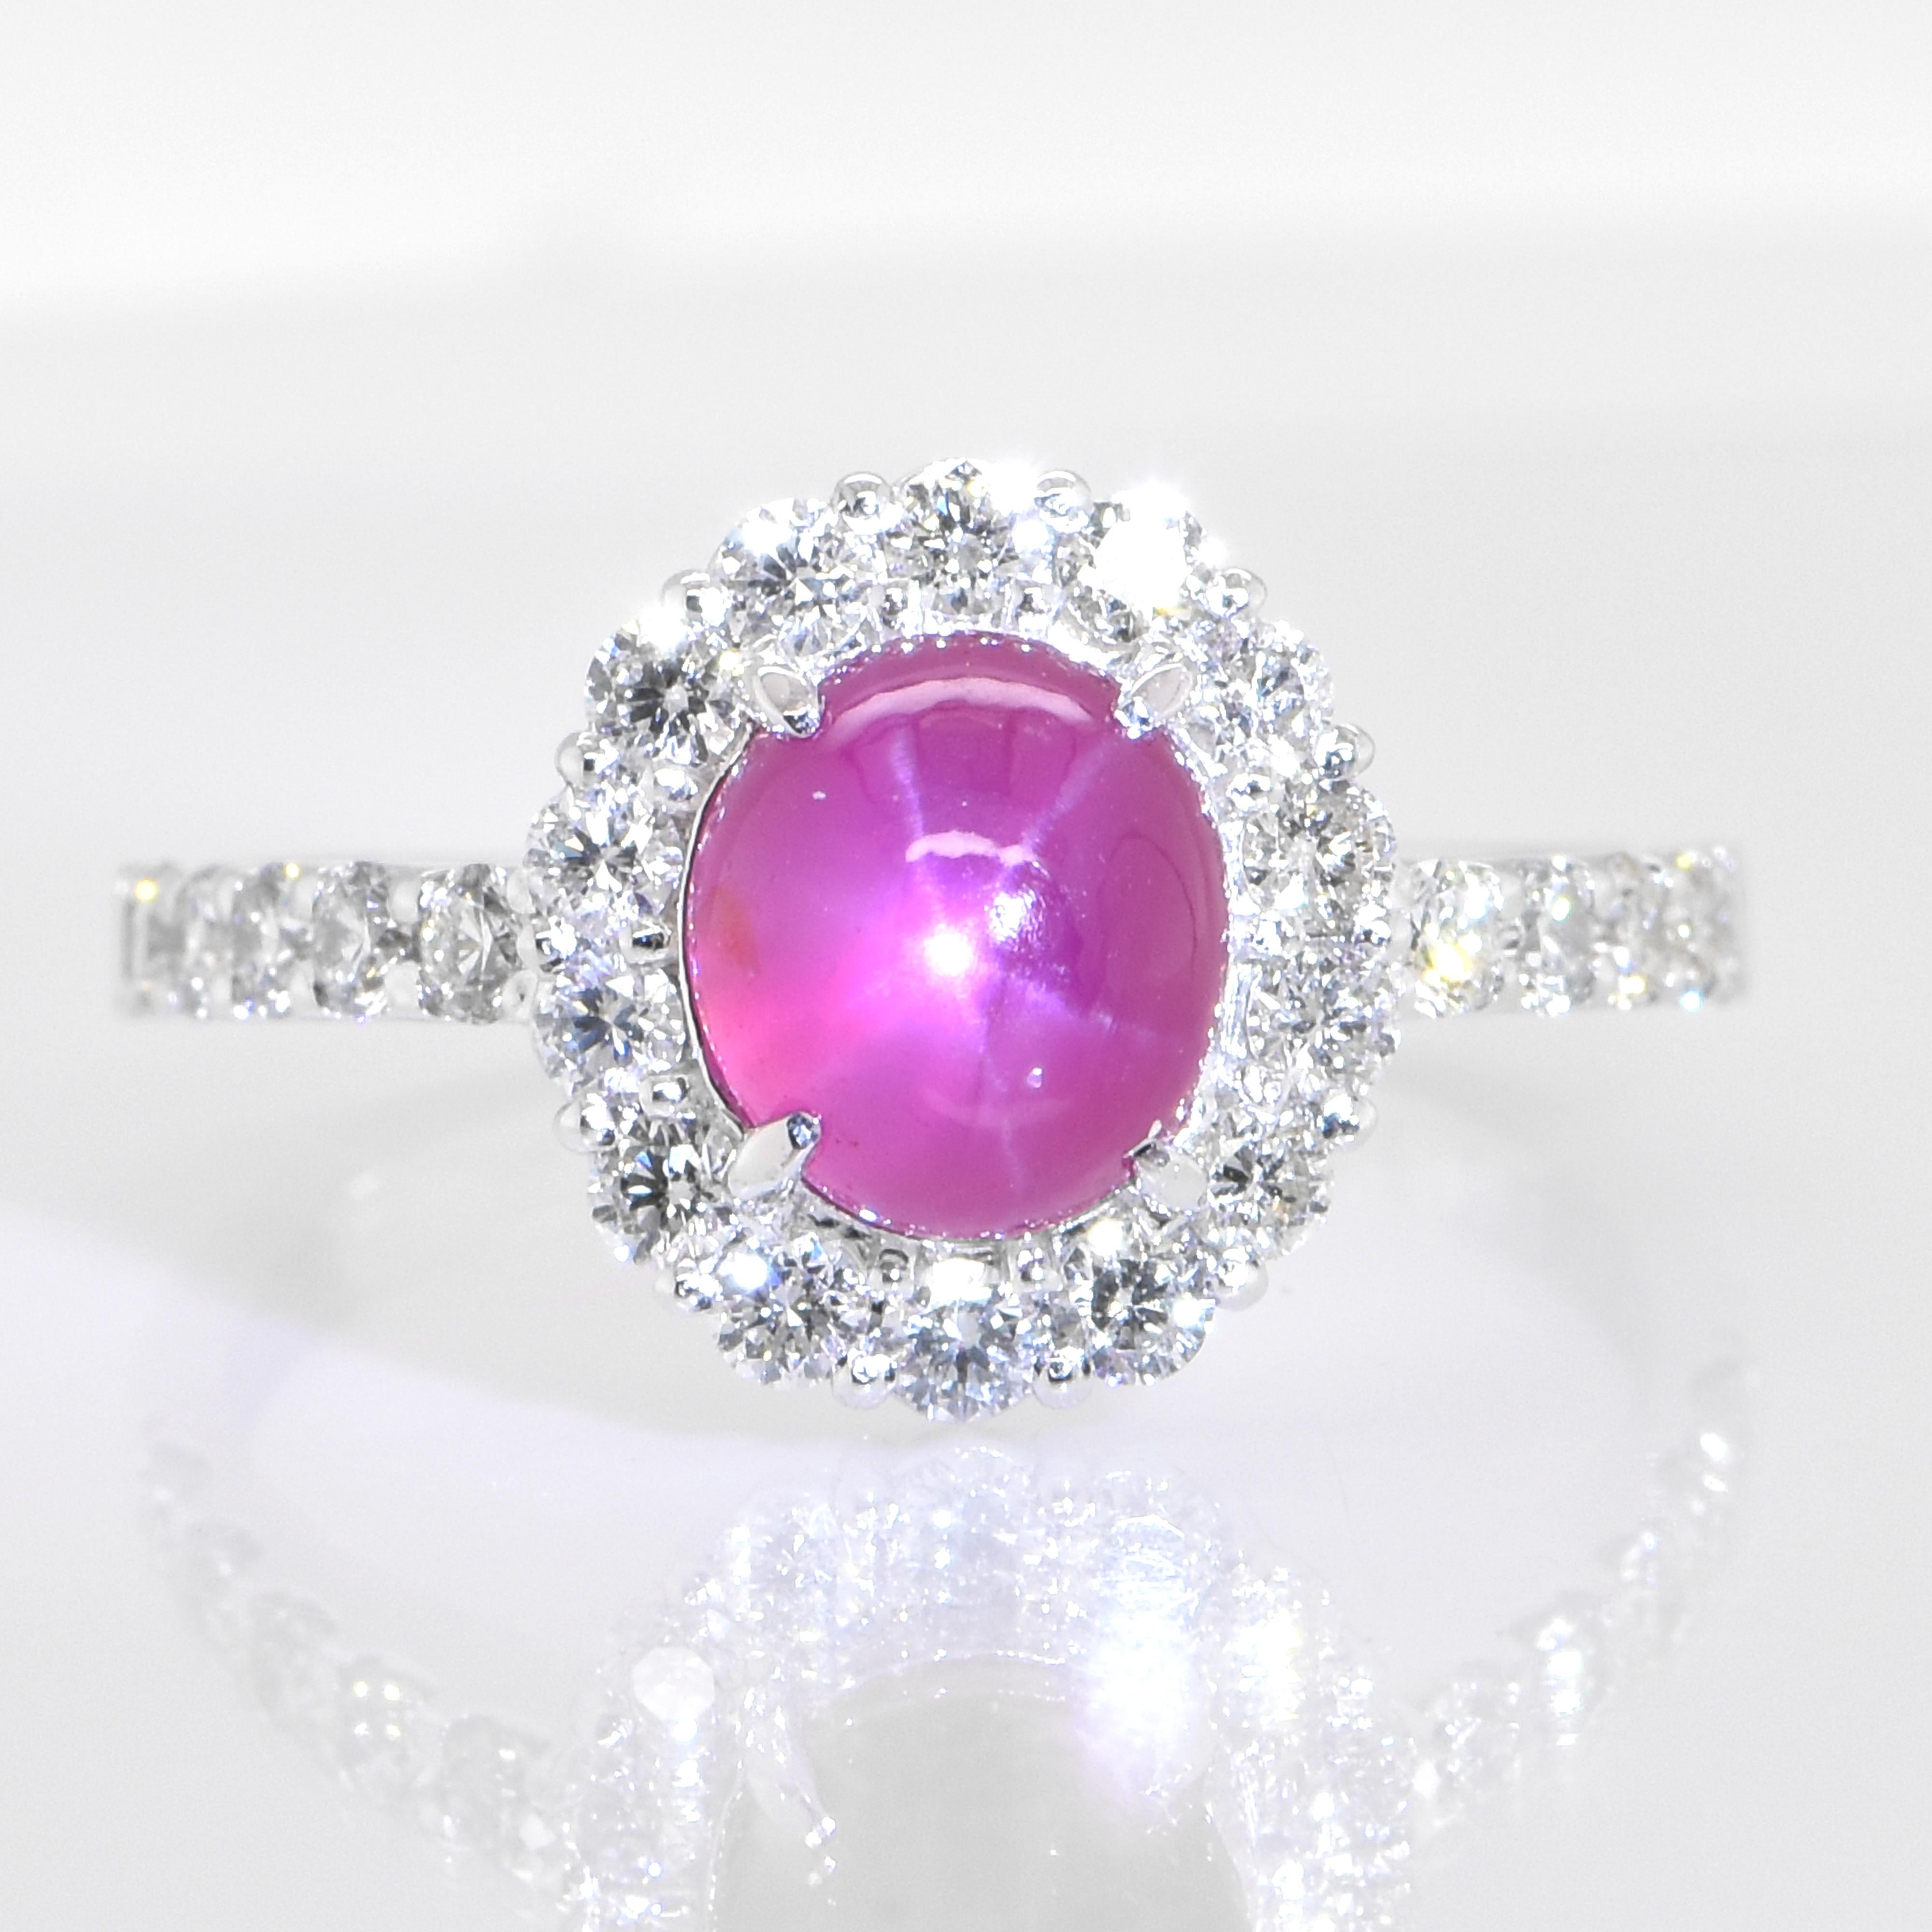 Cabochon 2.42 Carat Natural Star Ruby and Diamond Ring Set in Platinum